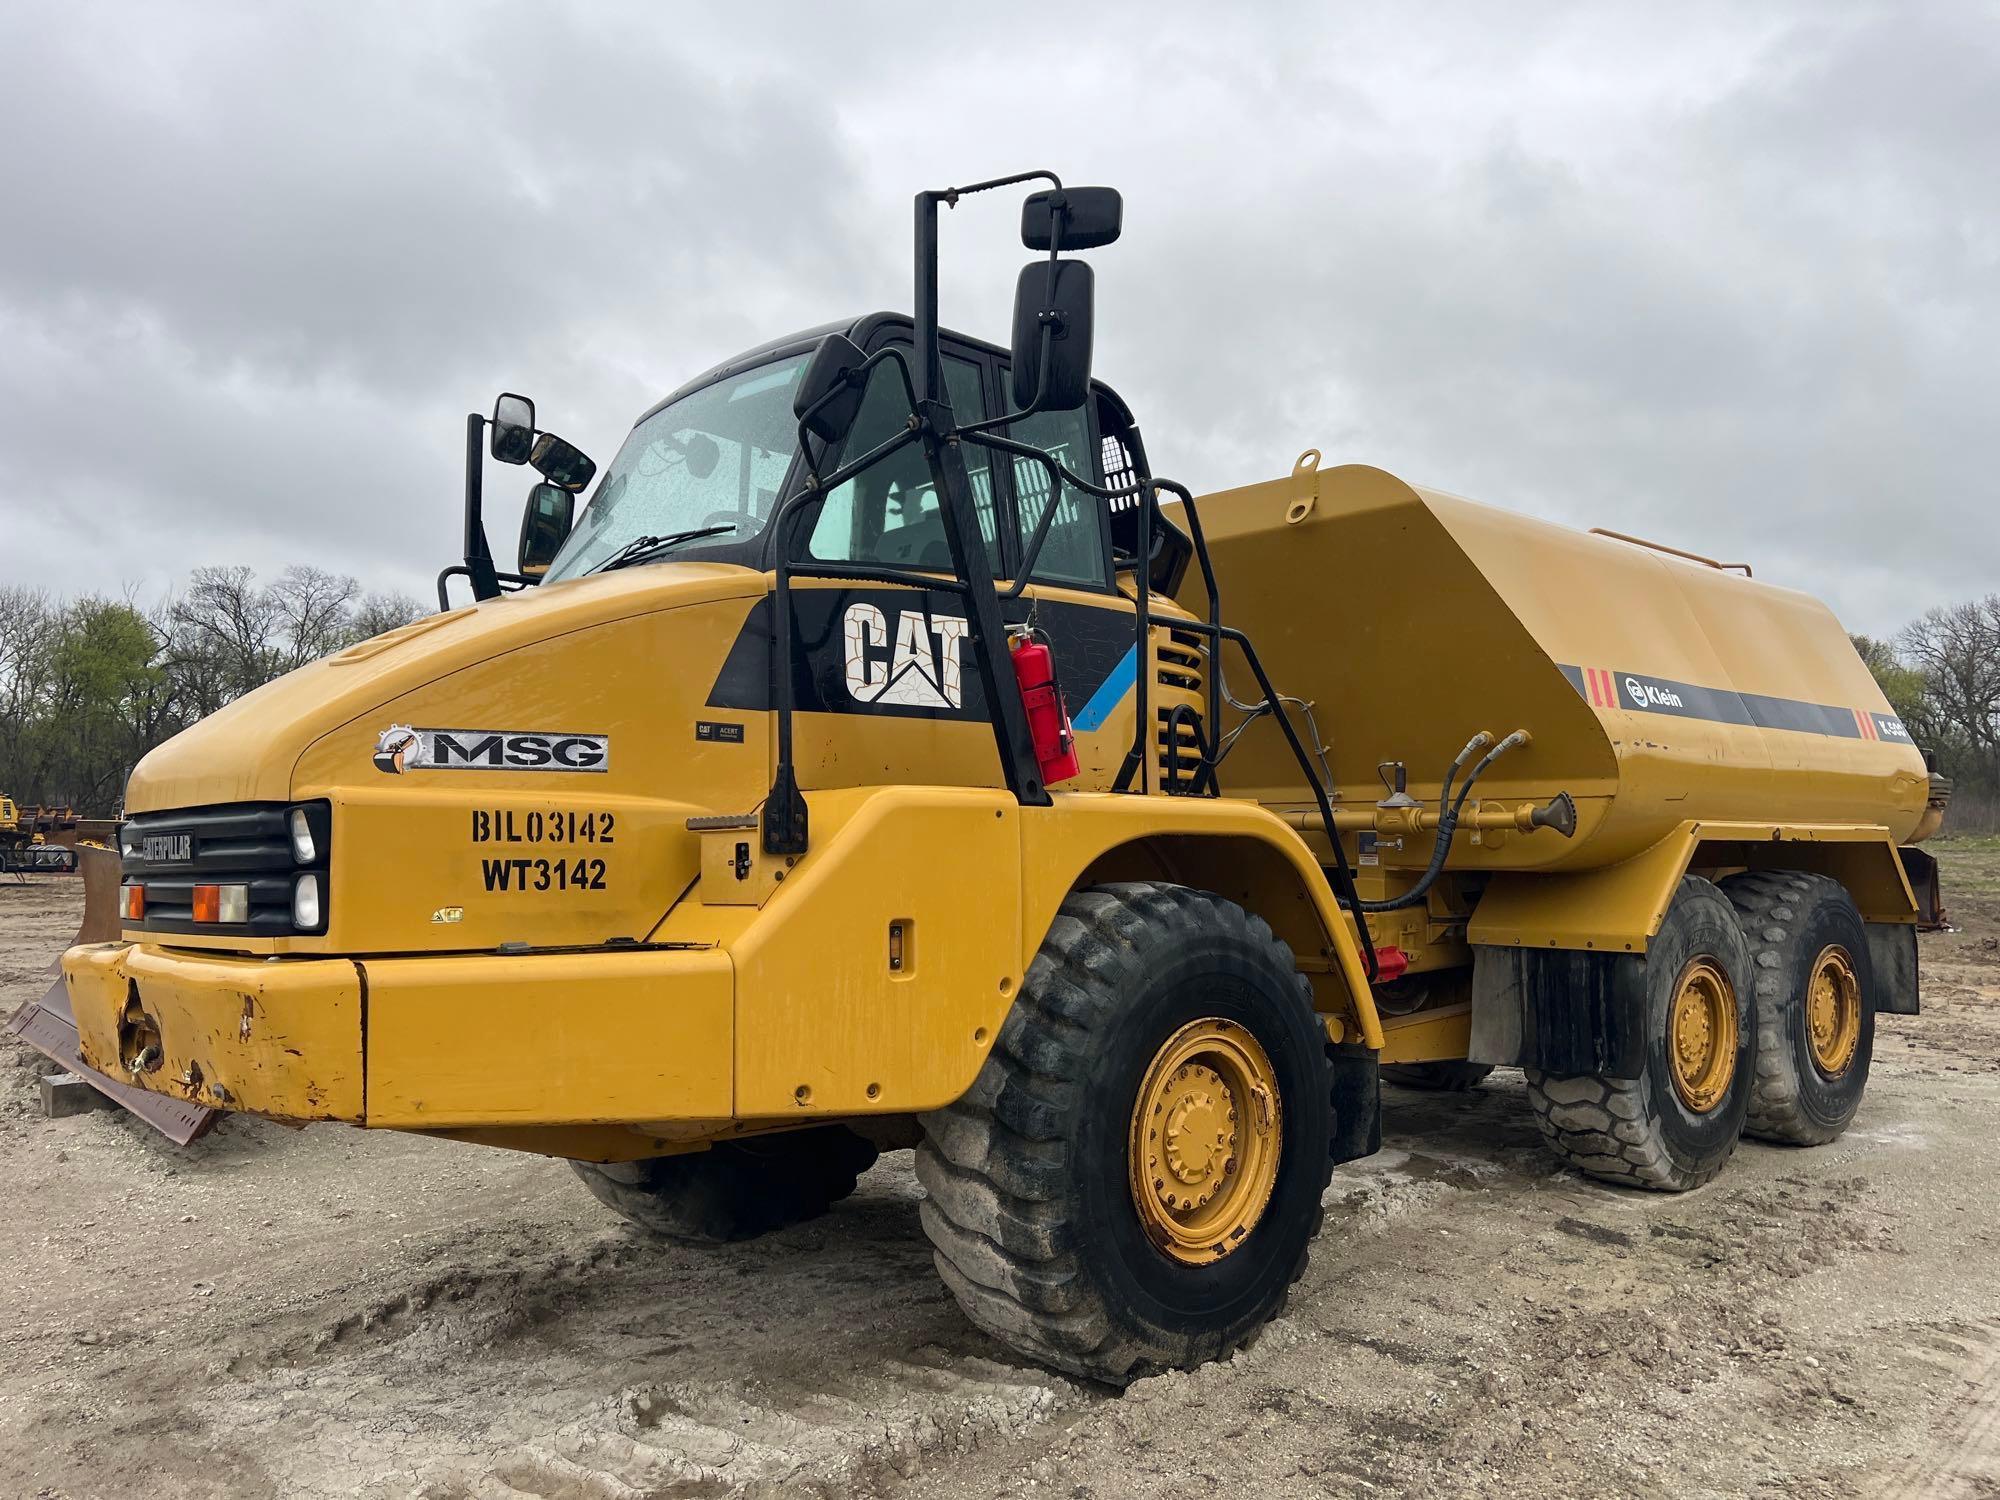 2013 CAT 725 WATER TRUCK SN:CAT00725HB1L03142 6x6, powered by Cat C11 diesel engine, equipped with